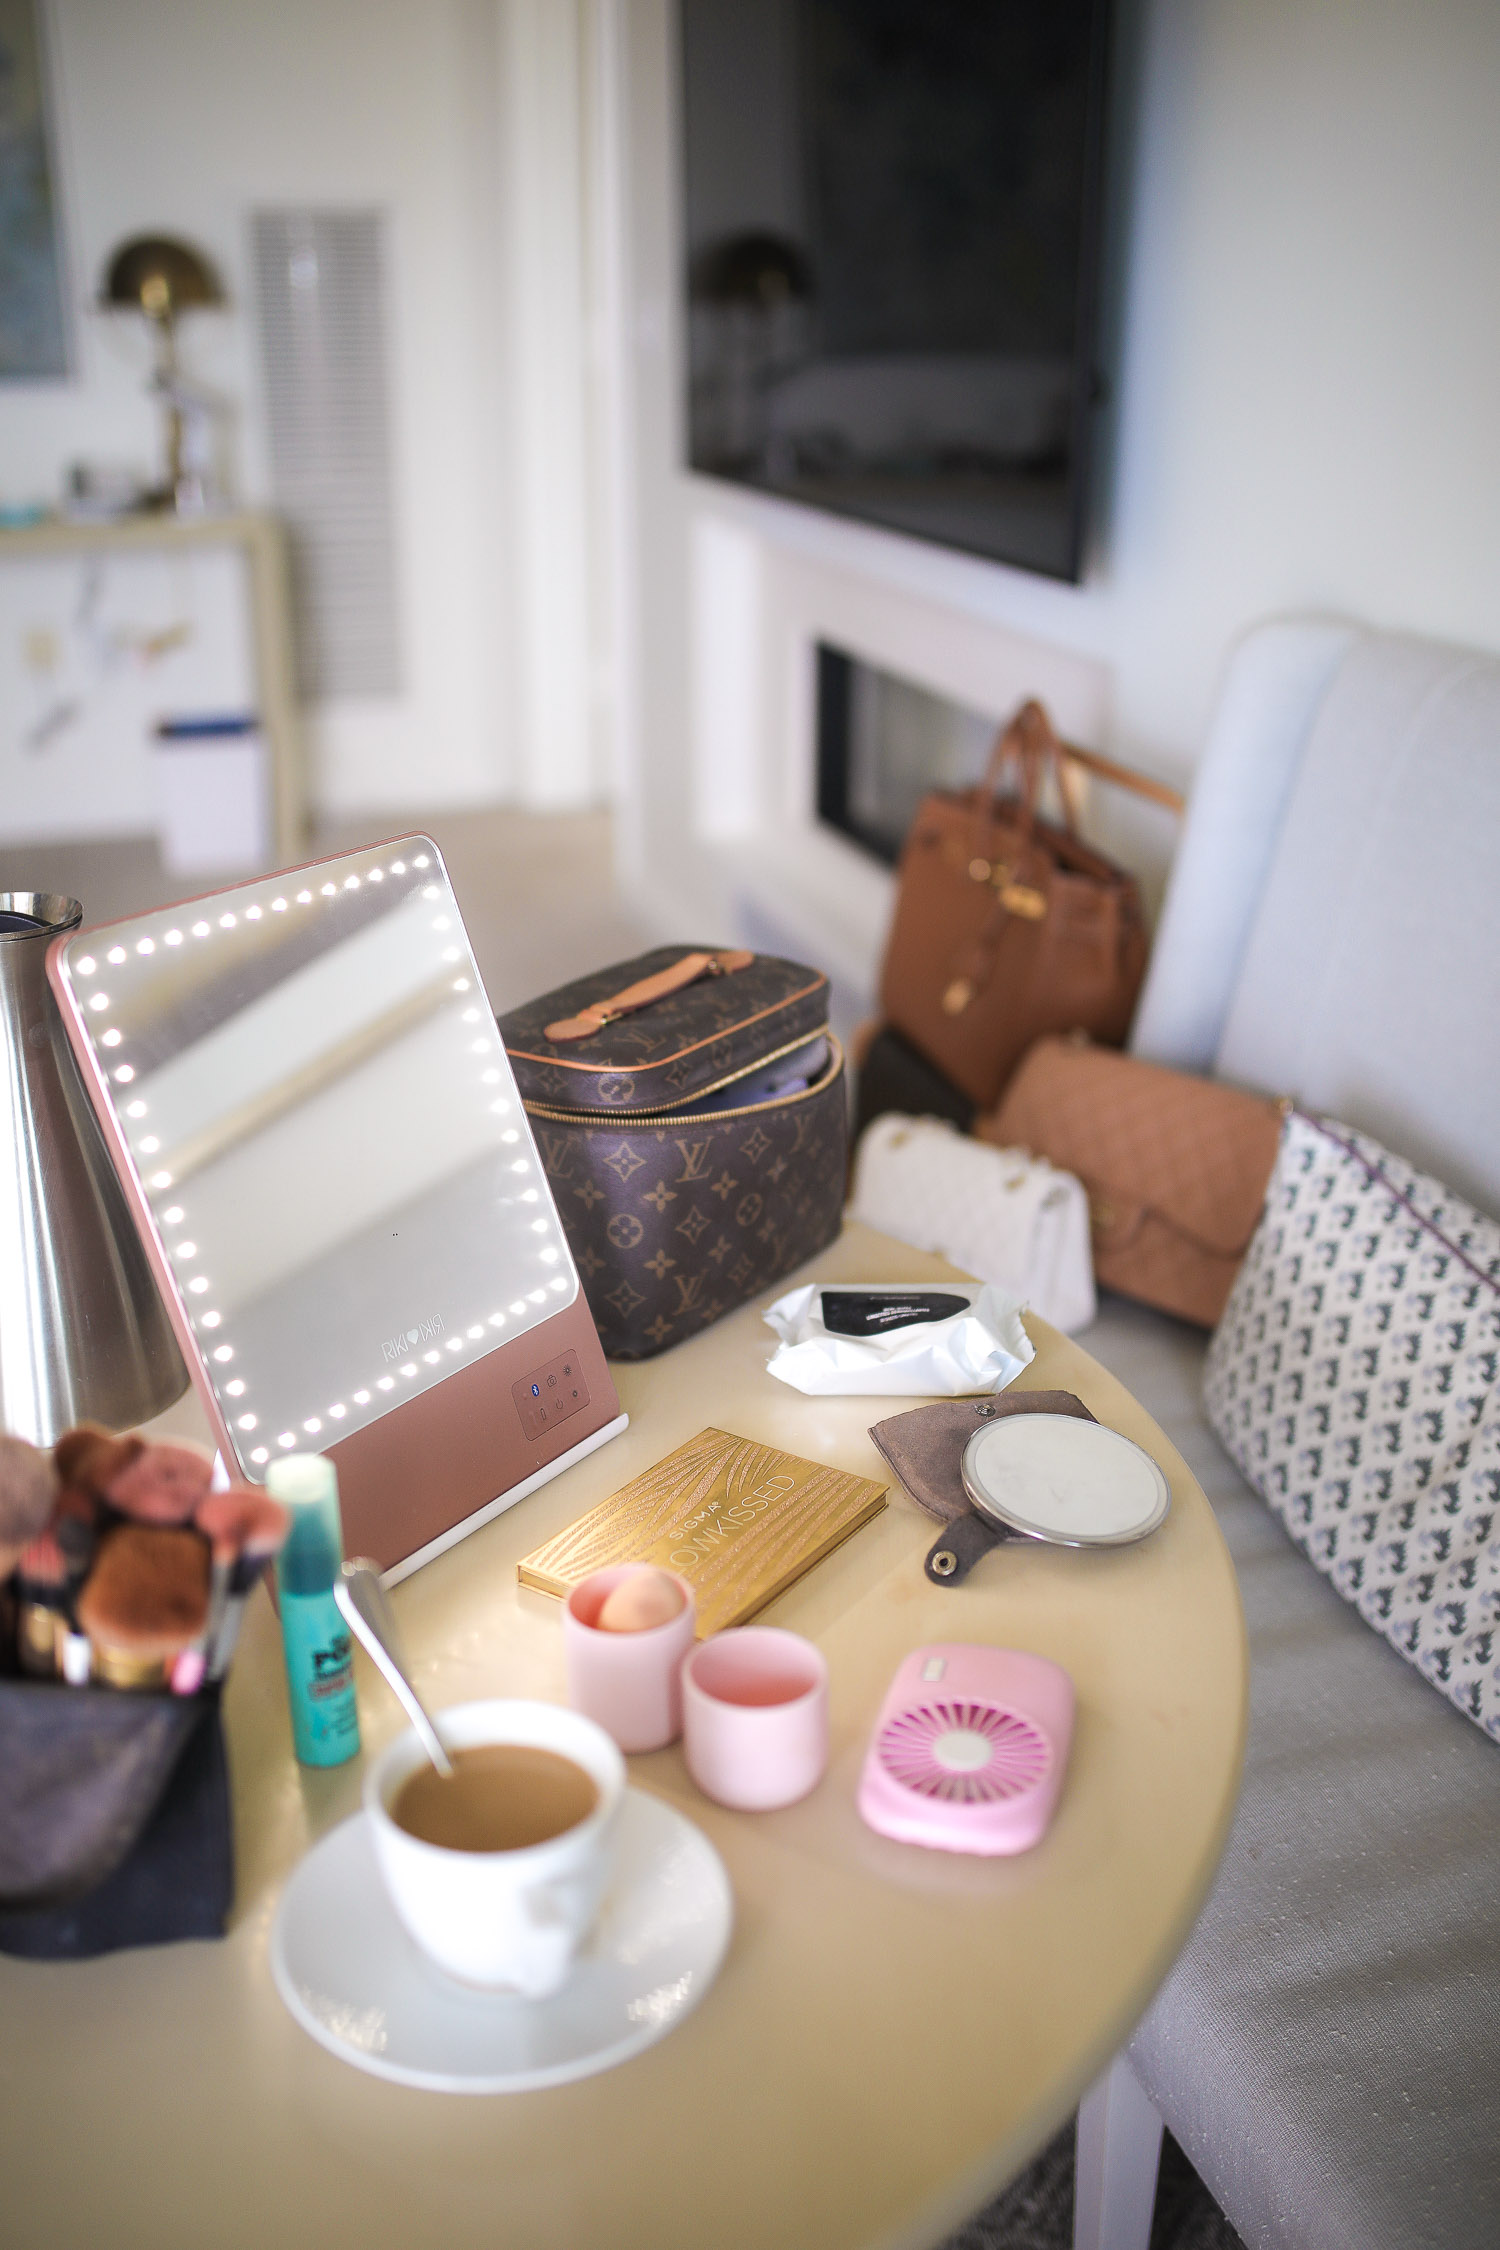 Riki Size Travel Mirror, pink travel fan makeup, beauty sponge holder travel amazon, Louis Vuitton Nice Case, Emily Gemma | Travel Hacks by popular life and style blog, The Sweetest Thing: image of a makeup mirror, Louis Vuitton makeup bag, makeup brush holder, cup of coffee, portable hand fan, beauty blender, and makeup pallet. 